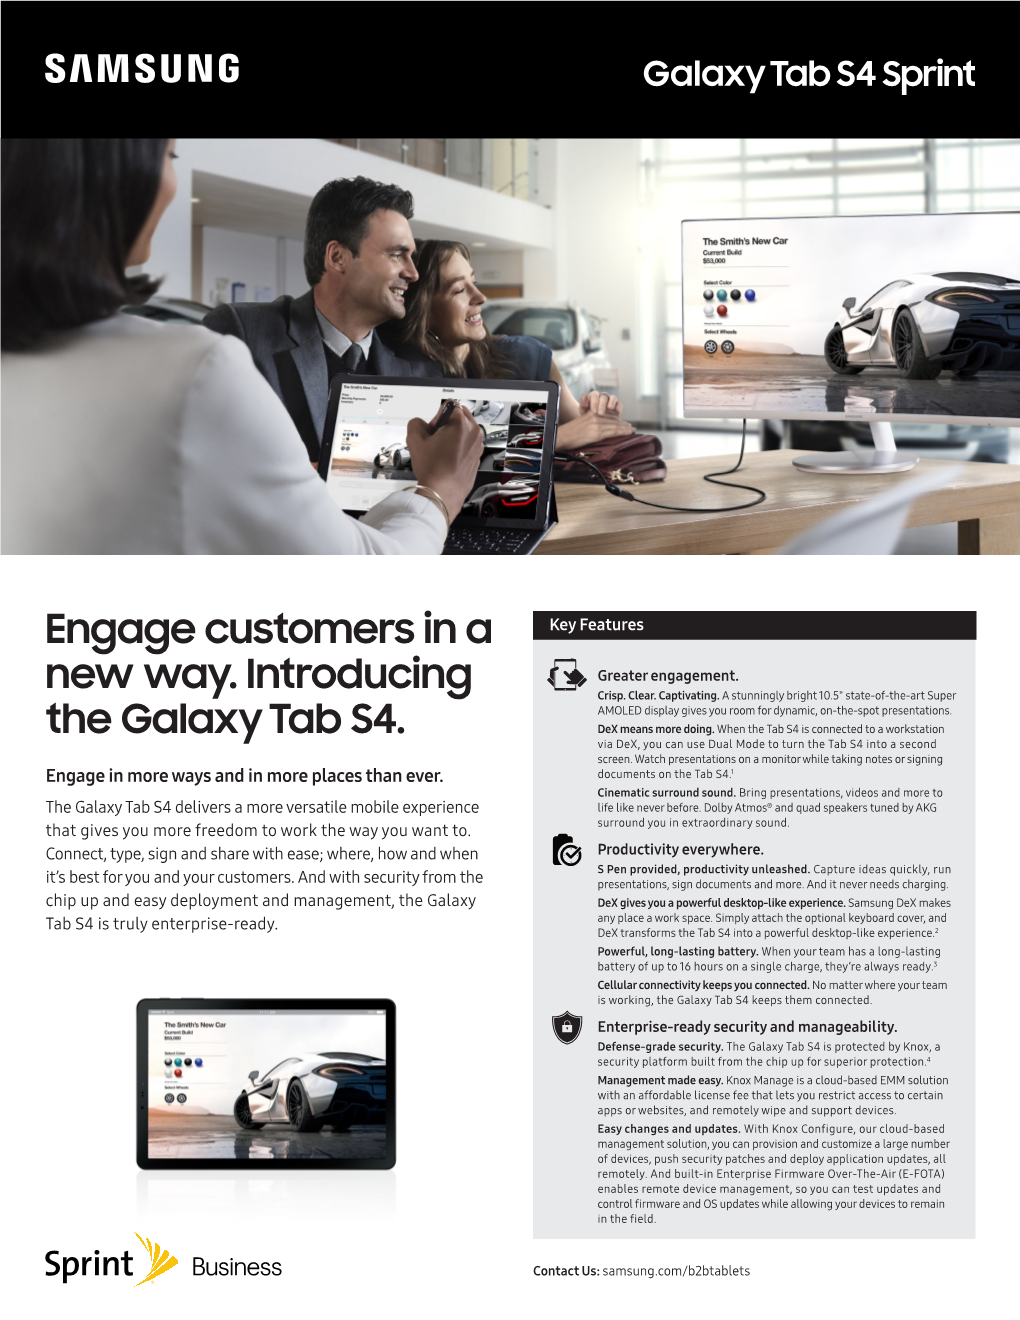 Engage Customers in a New Way. Introducing the Galaxy